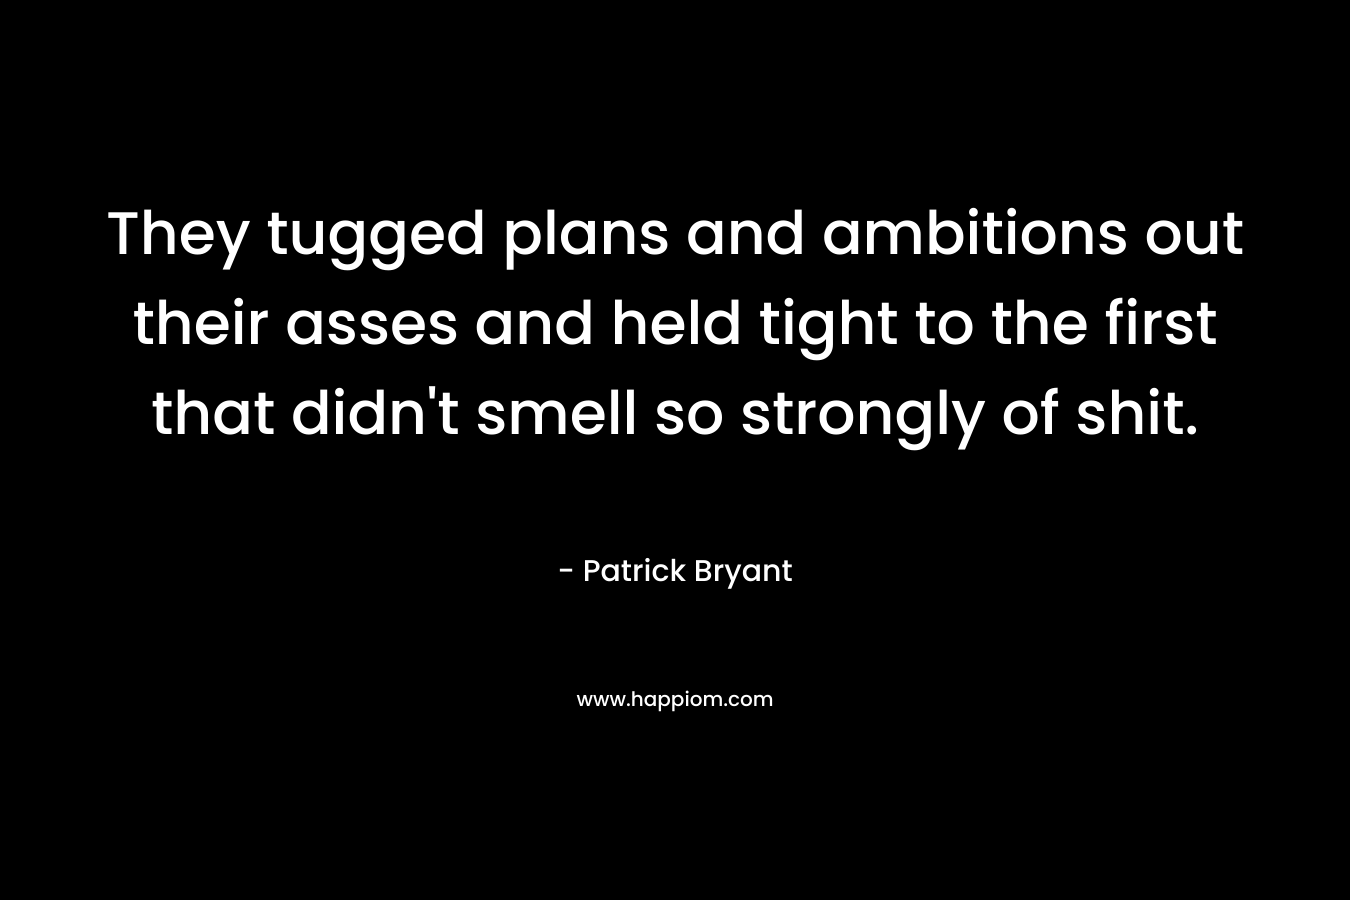 They tugged plans and ambitions out their asses and held tight to the first that didn’t smell so strongly of shit. – Patrick Bryant